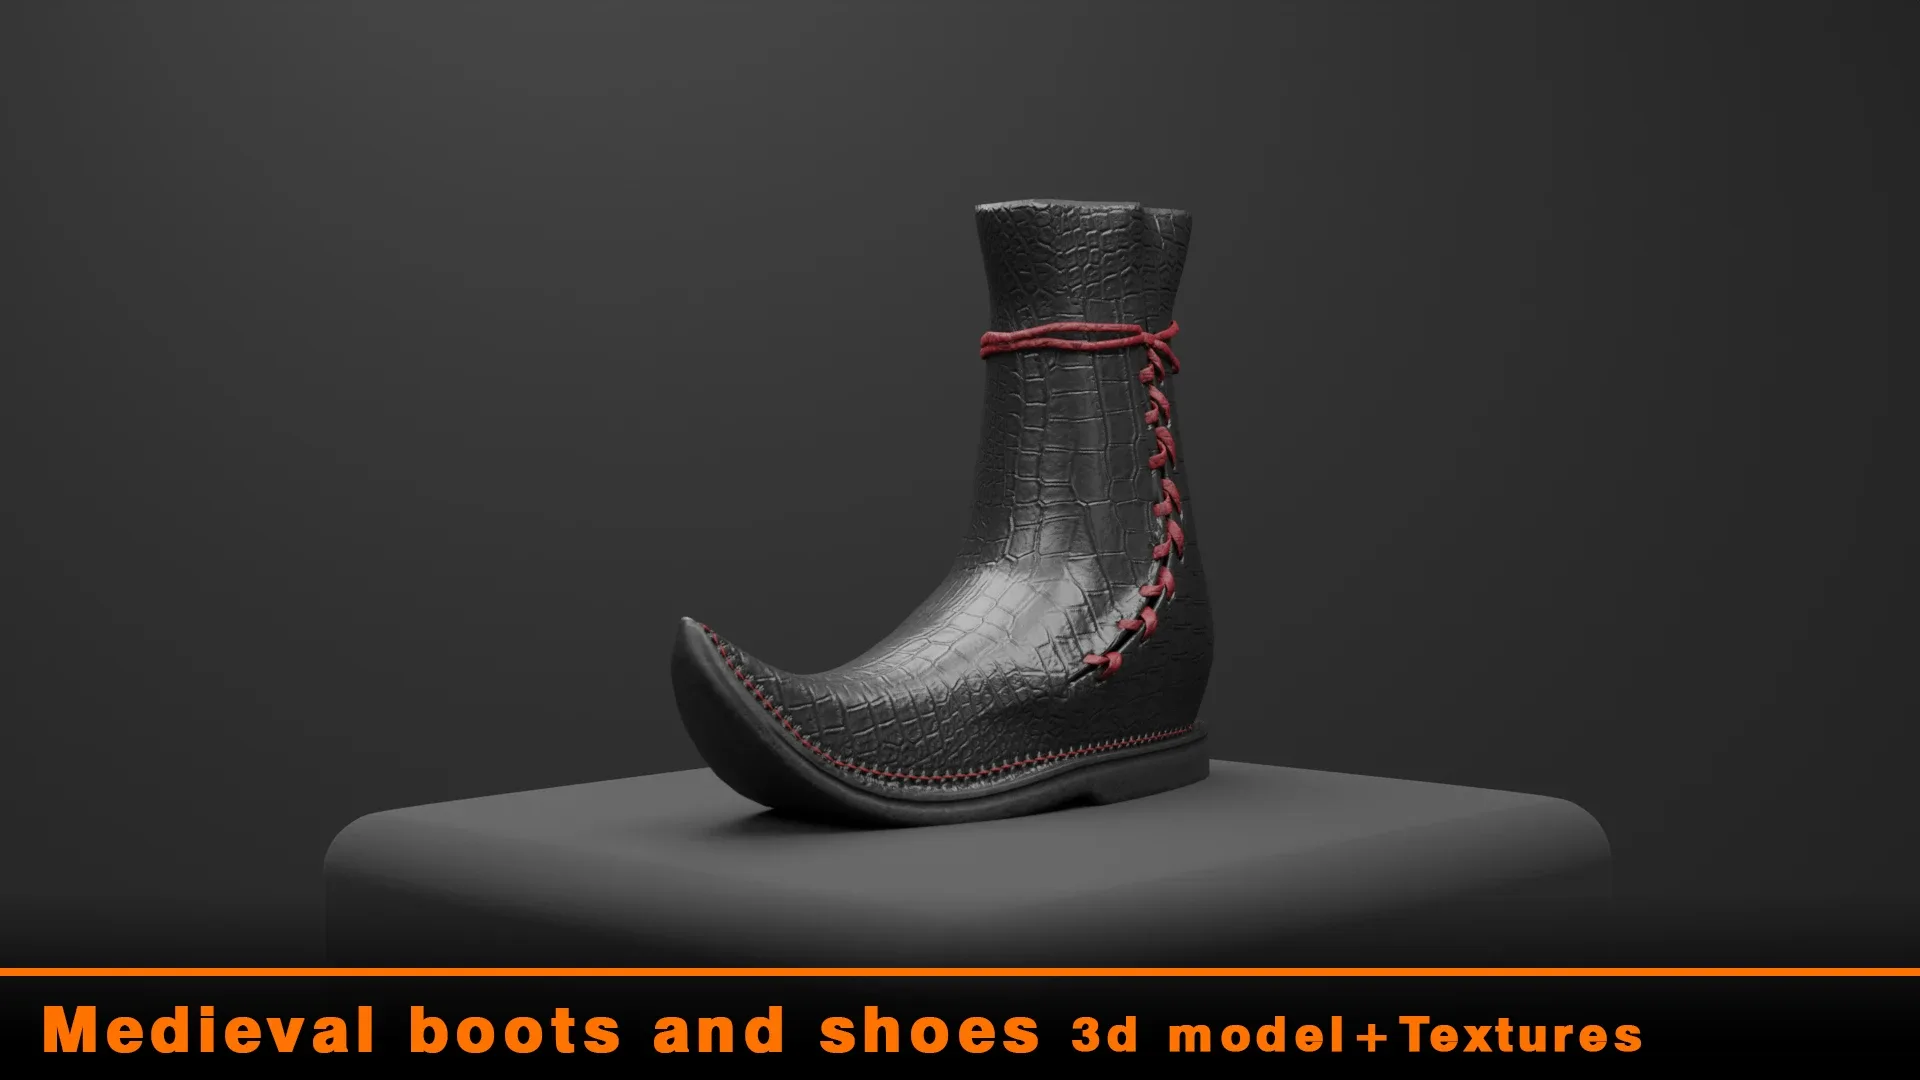 Medieval boots and shoes 3d model + Textures